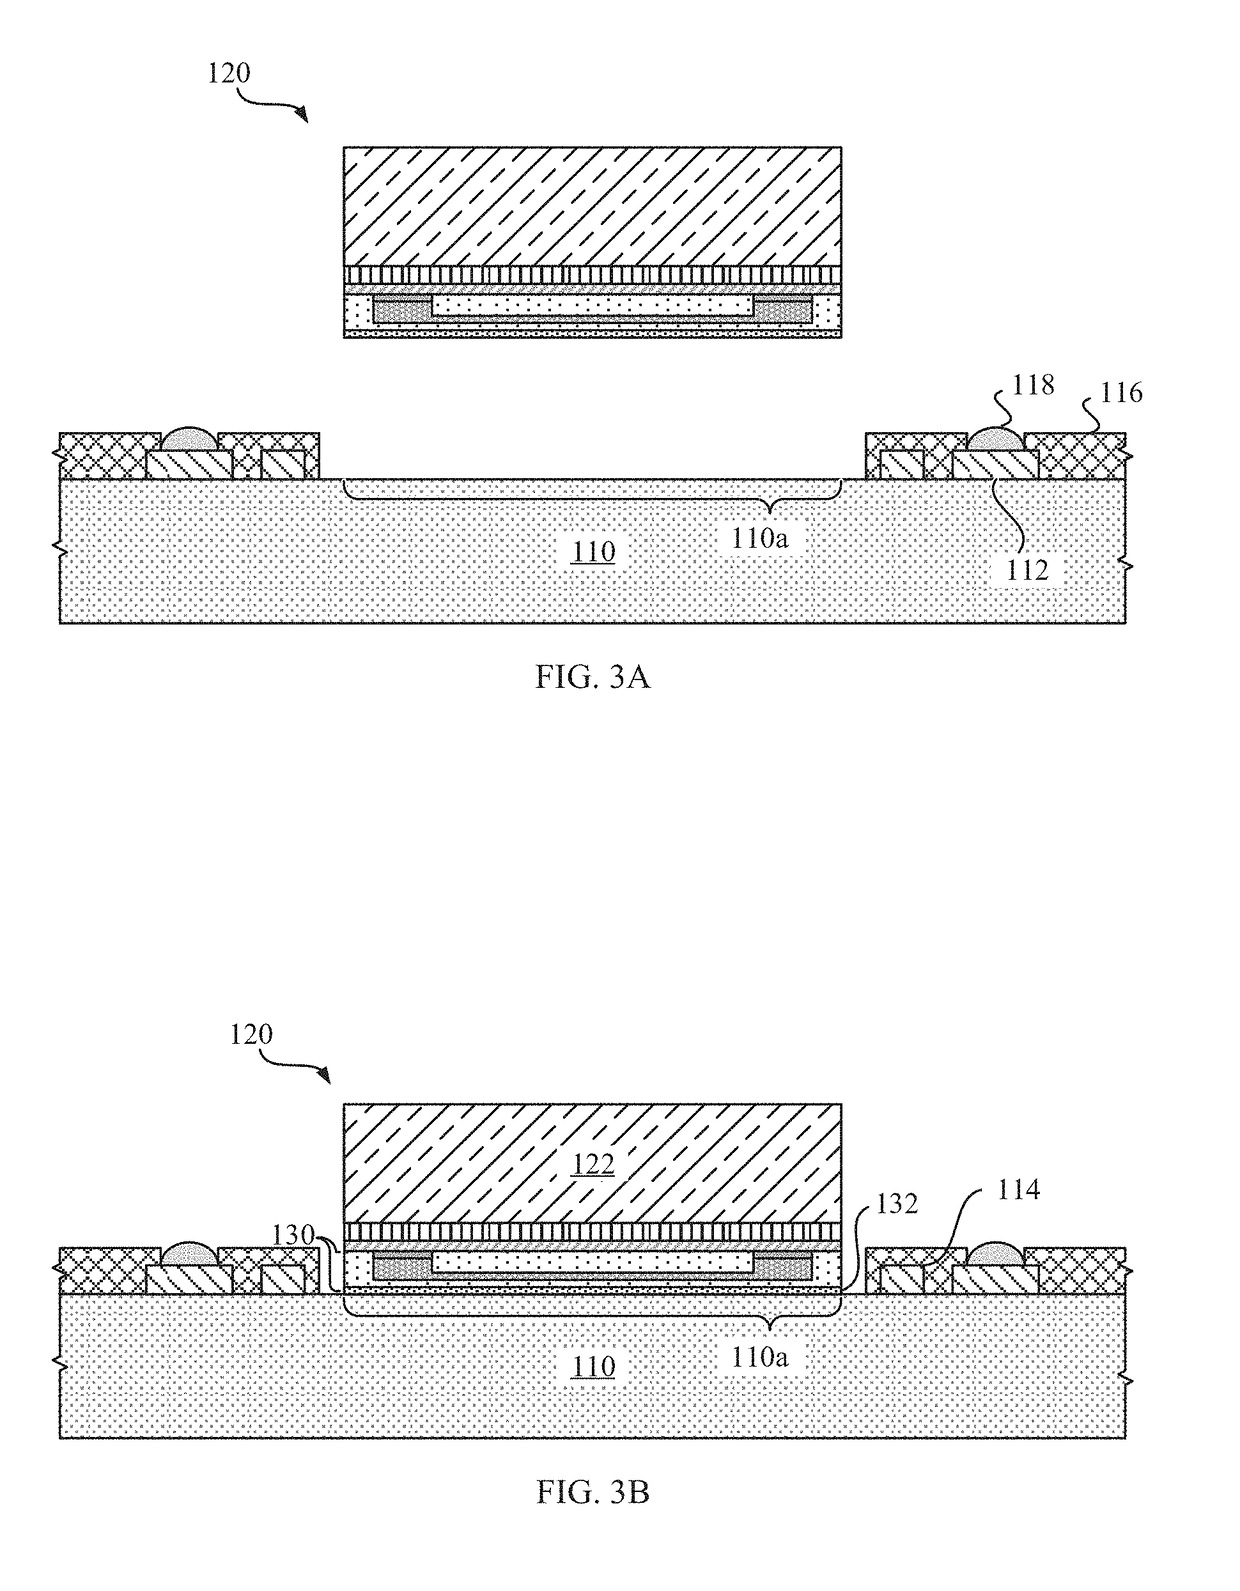 High-density interconnecting adhesive tape